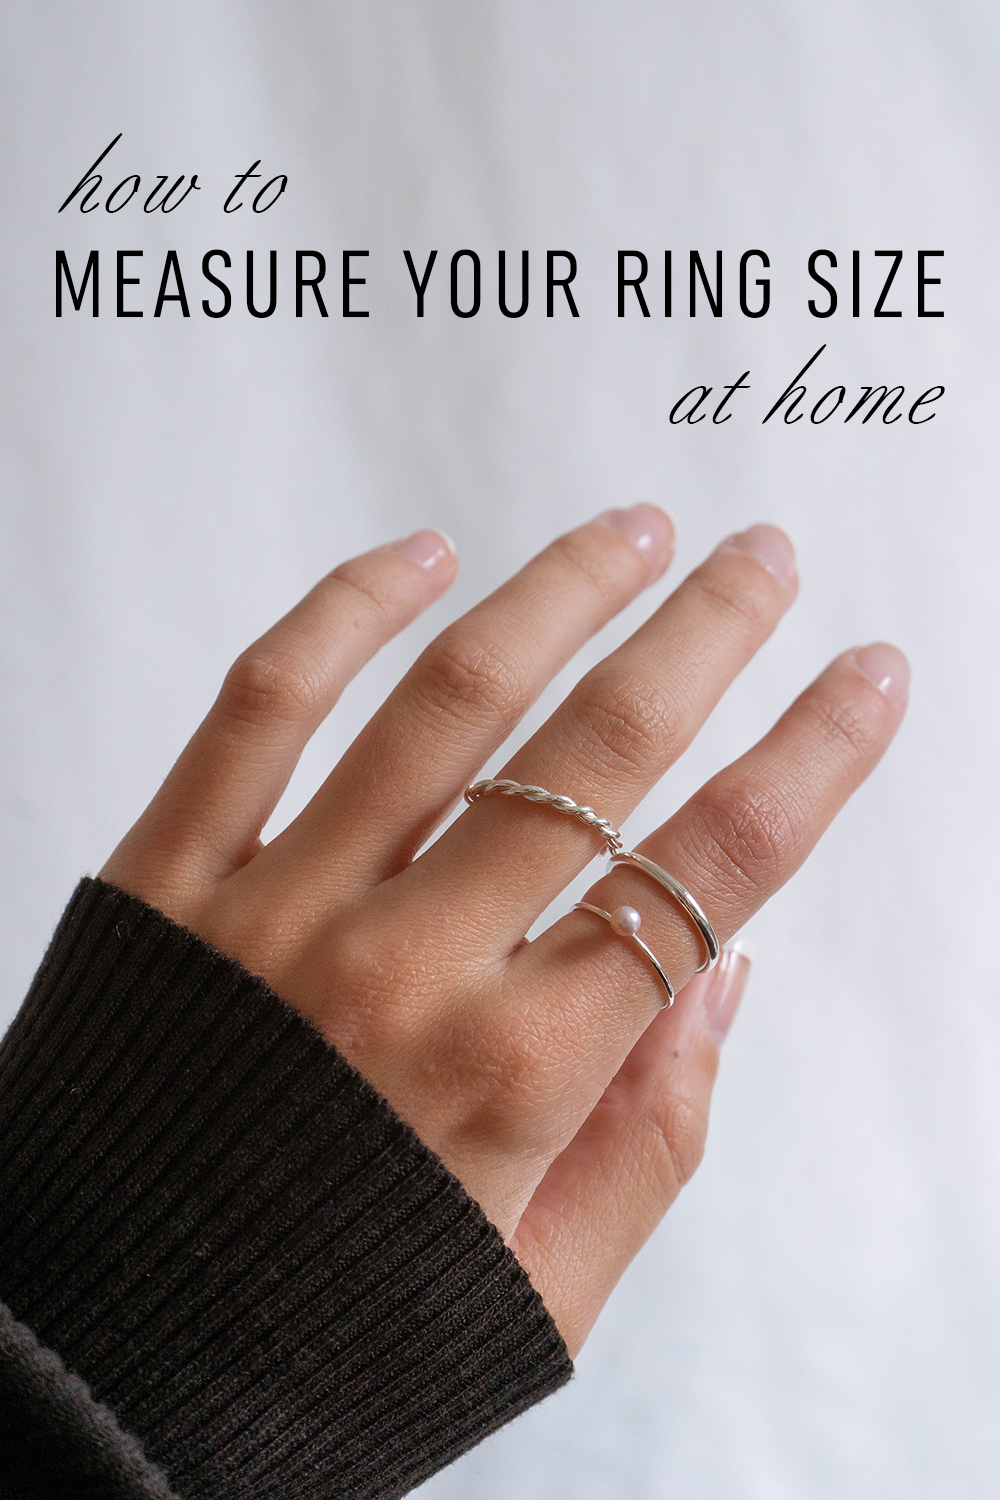 How to find your ring size at home.